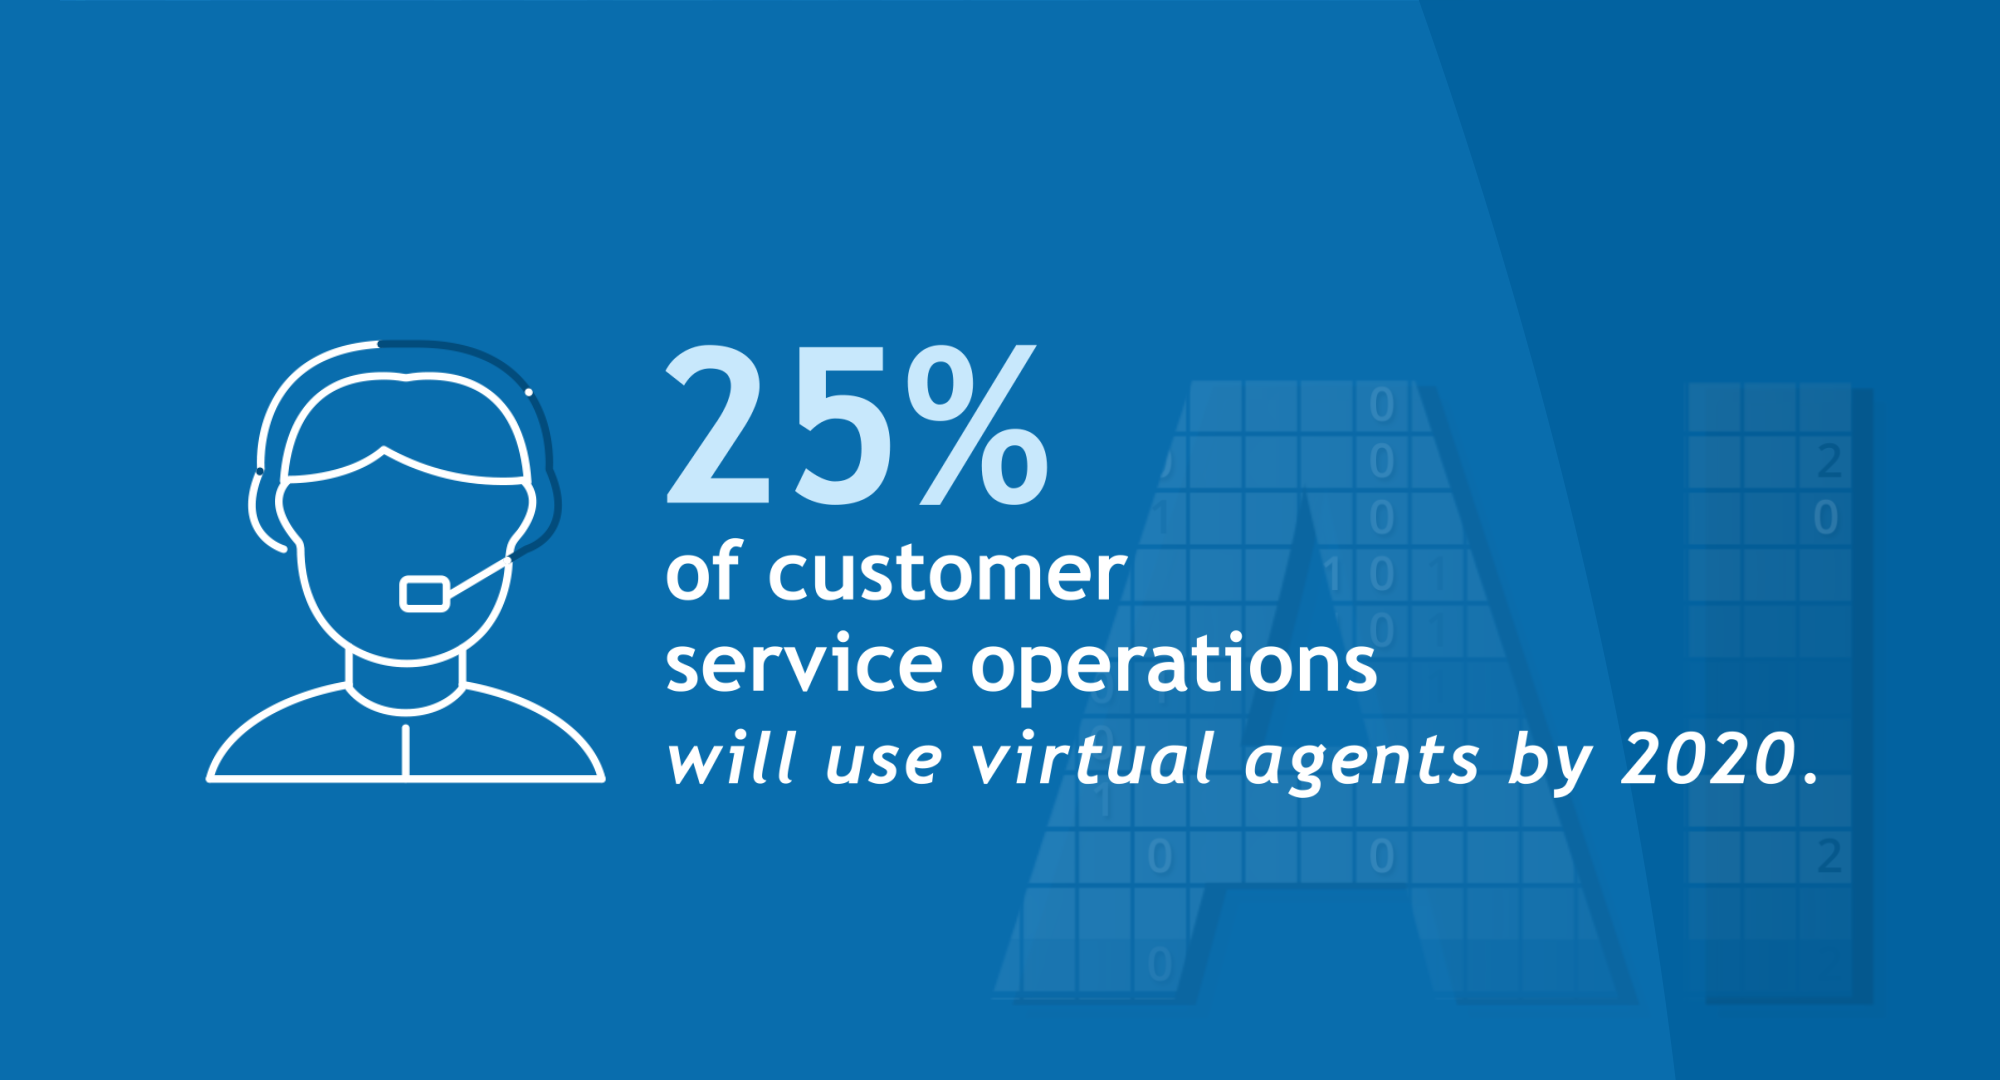 25 percent of customer service operations will use virtual agents by 2020.